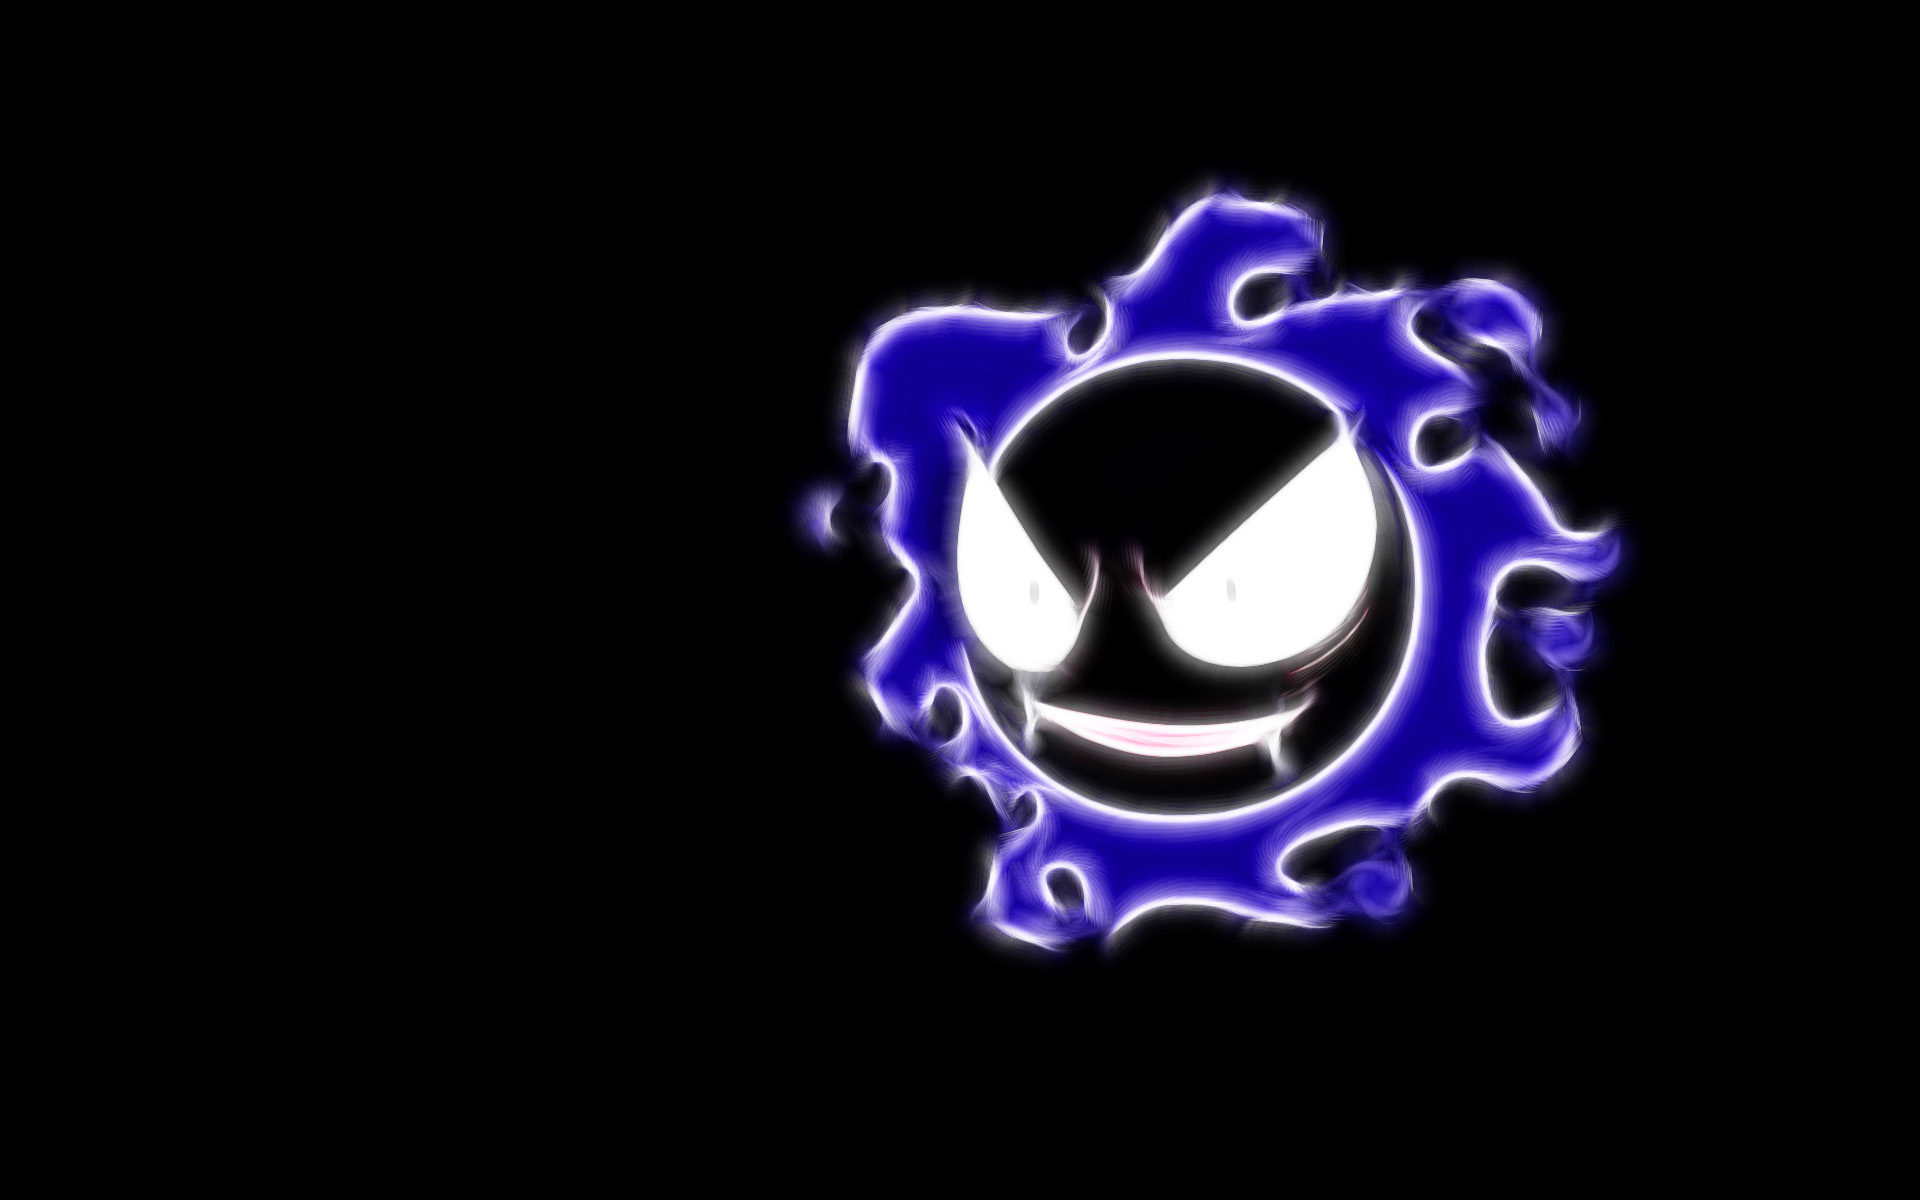 A haunting Gastly Pokémon floating in a dark background, emanating an ominous aura.